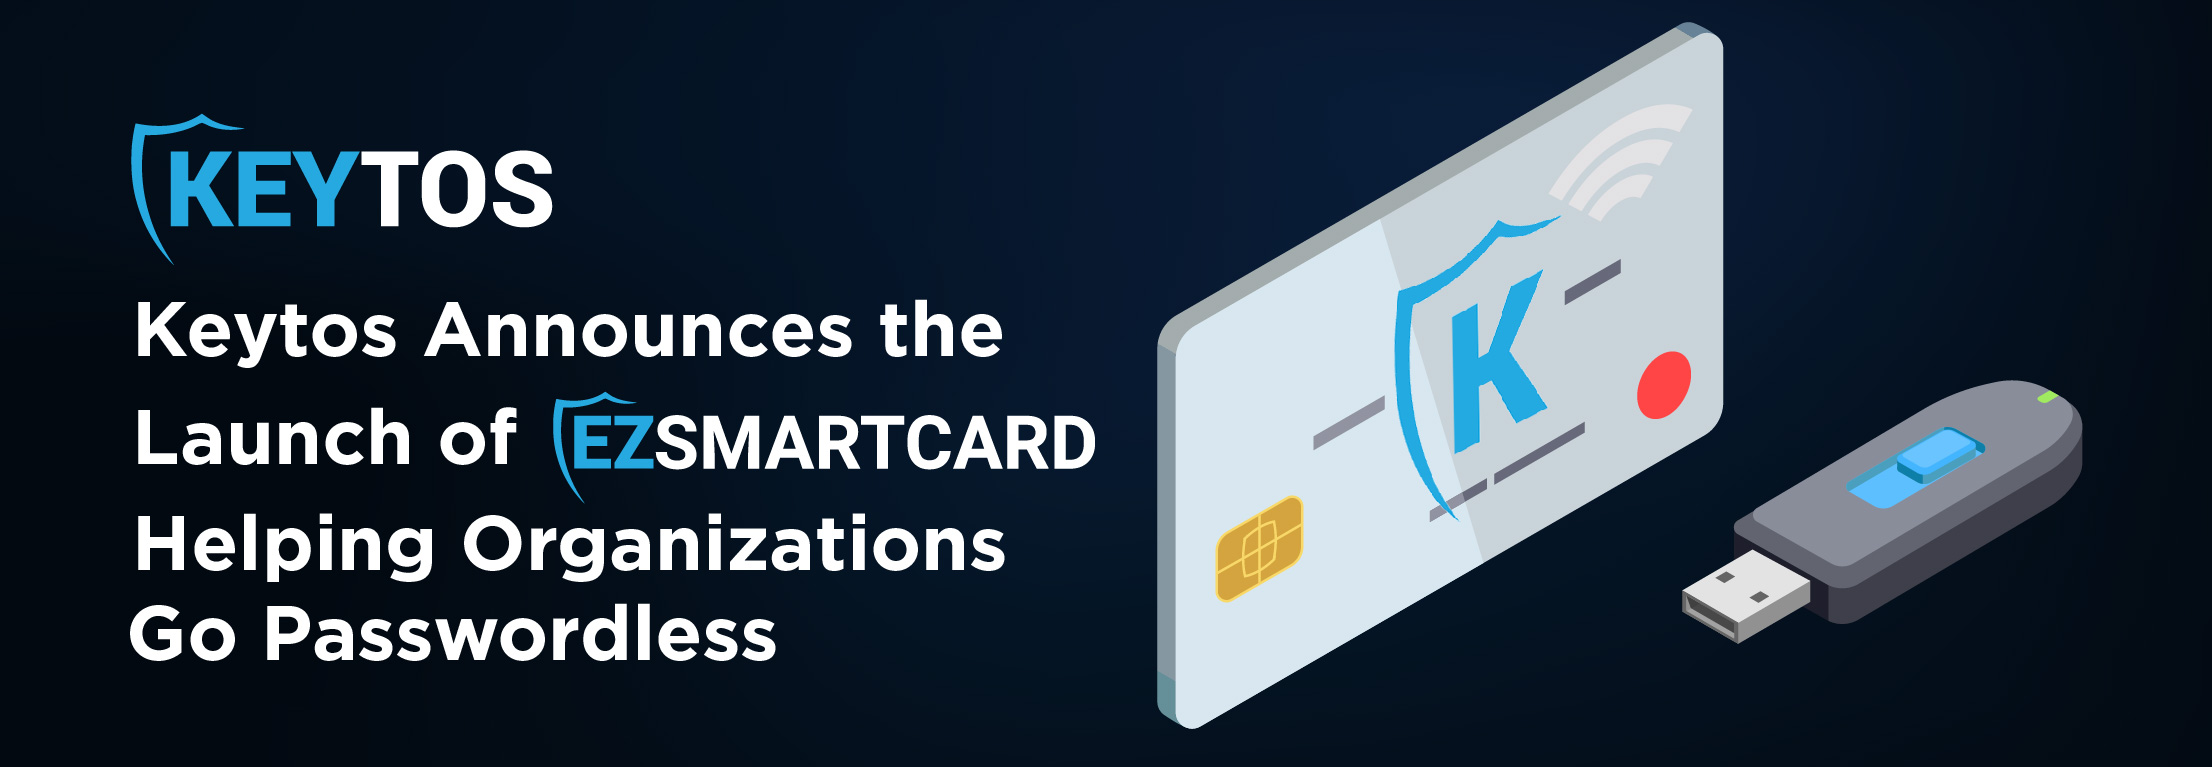 SmartCard Management just got easy with Keytos and Azure